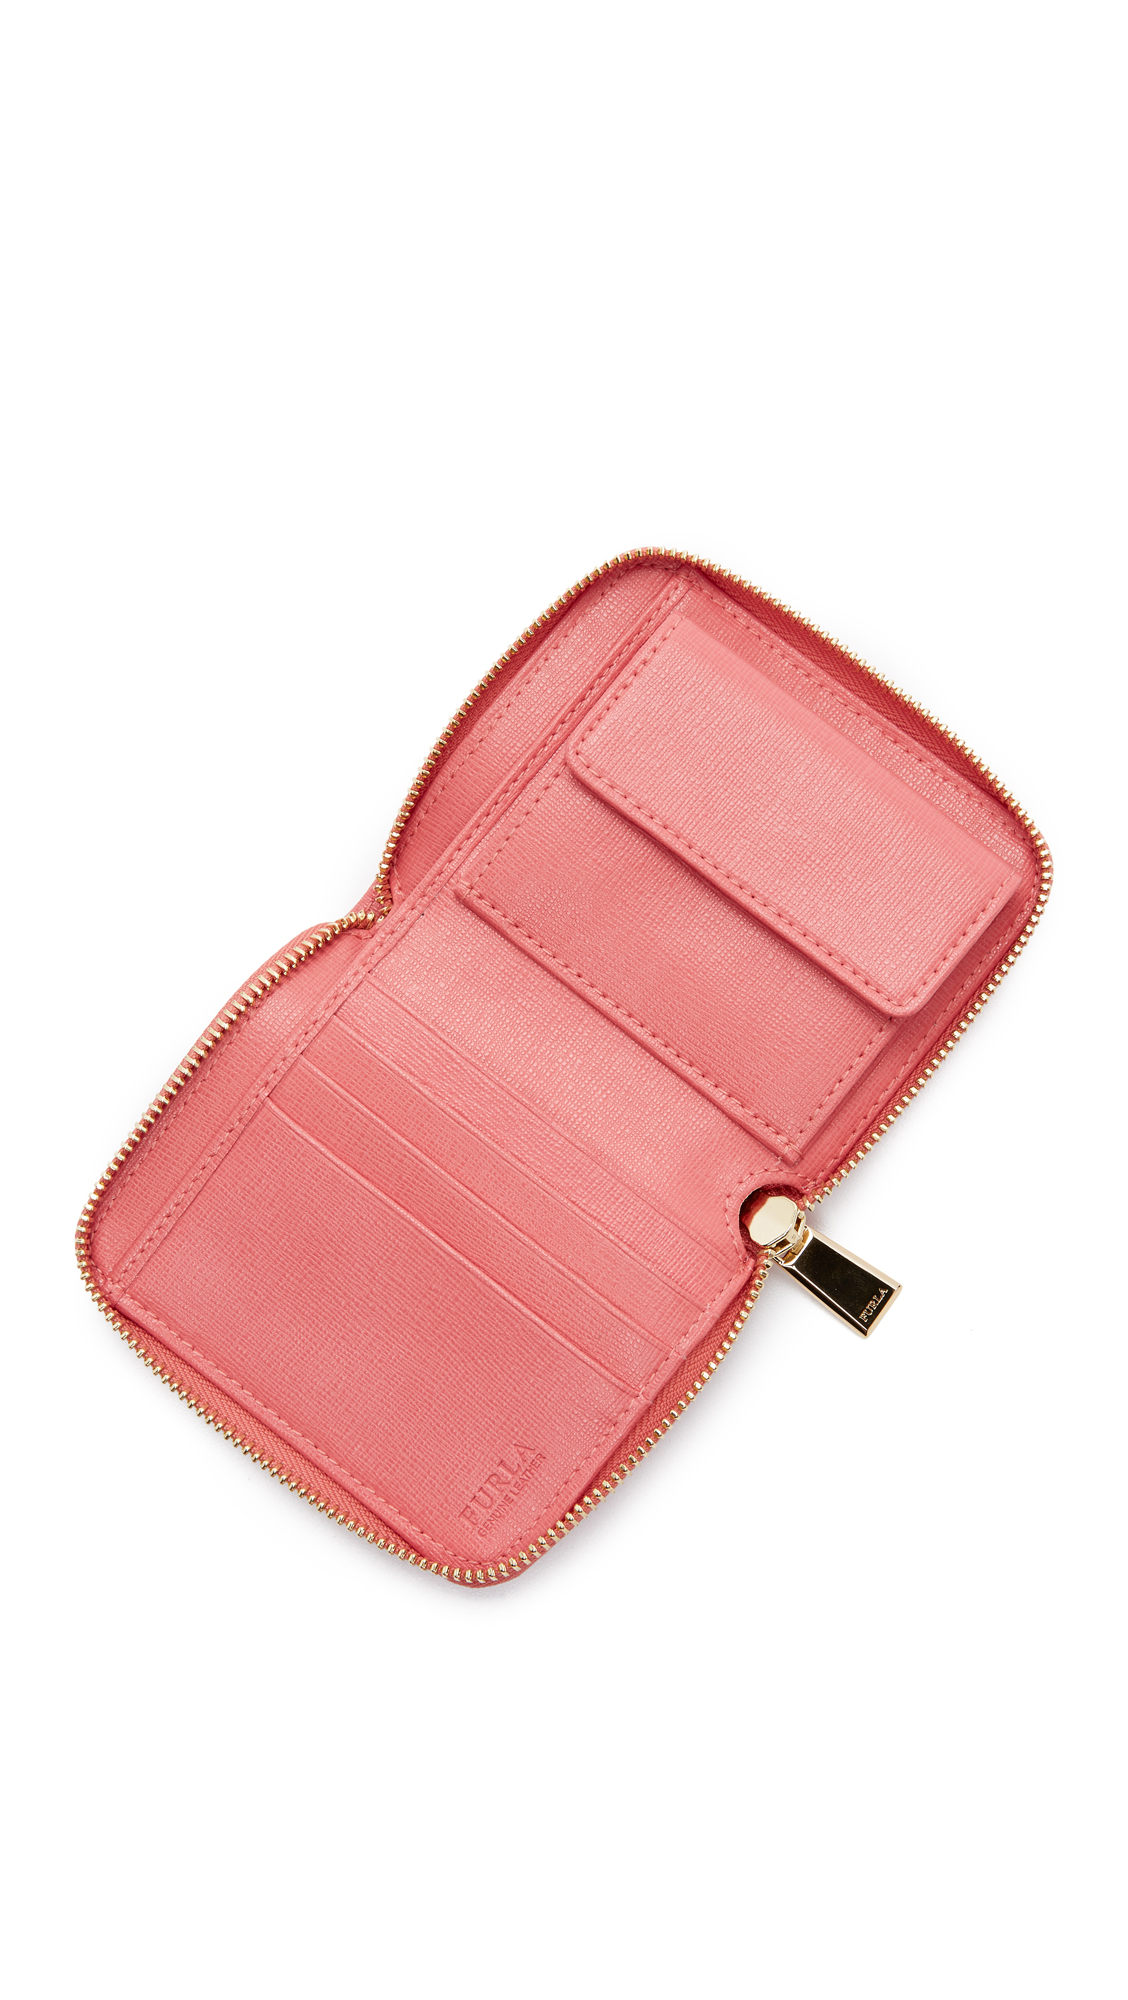 Furla Leather Babylon Small Zip Around Wallet - Corallo in Pink - Lyst